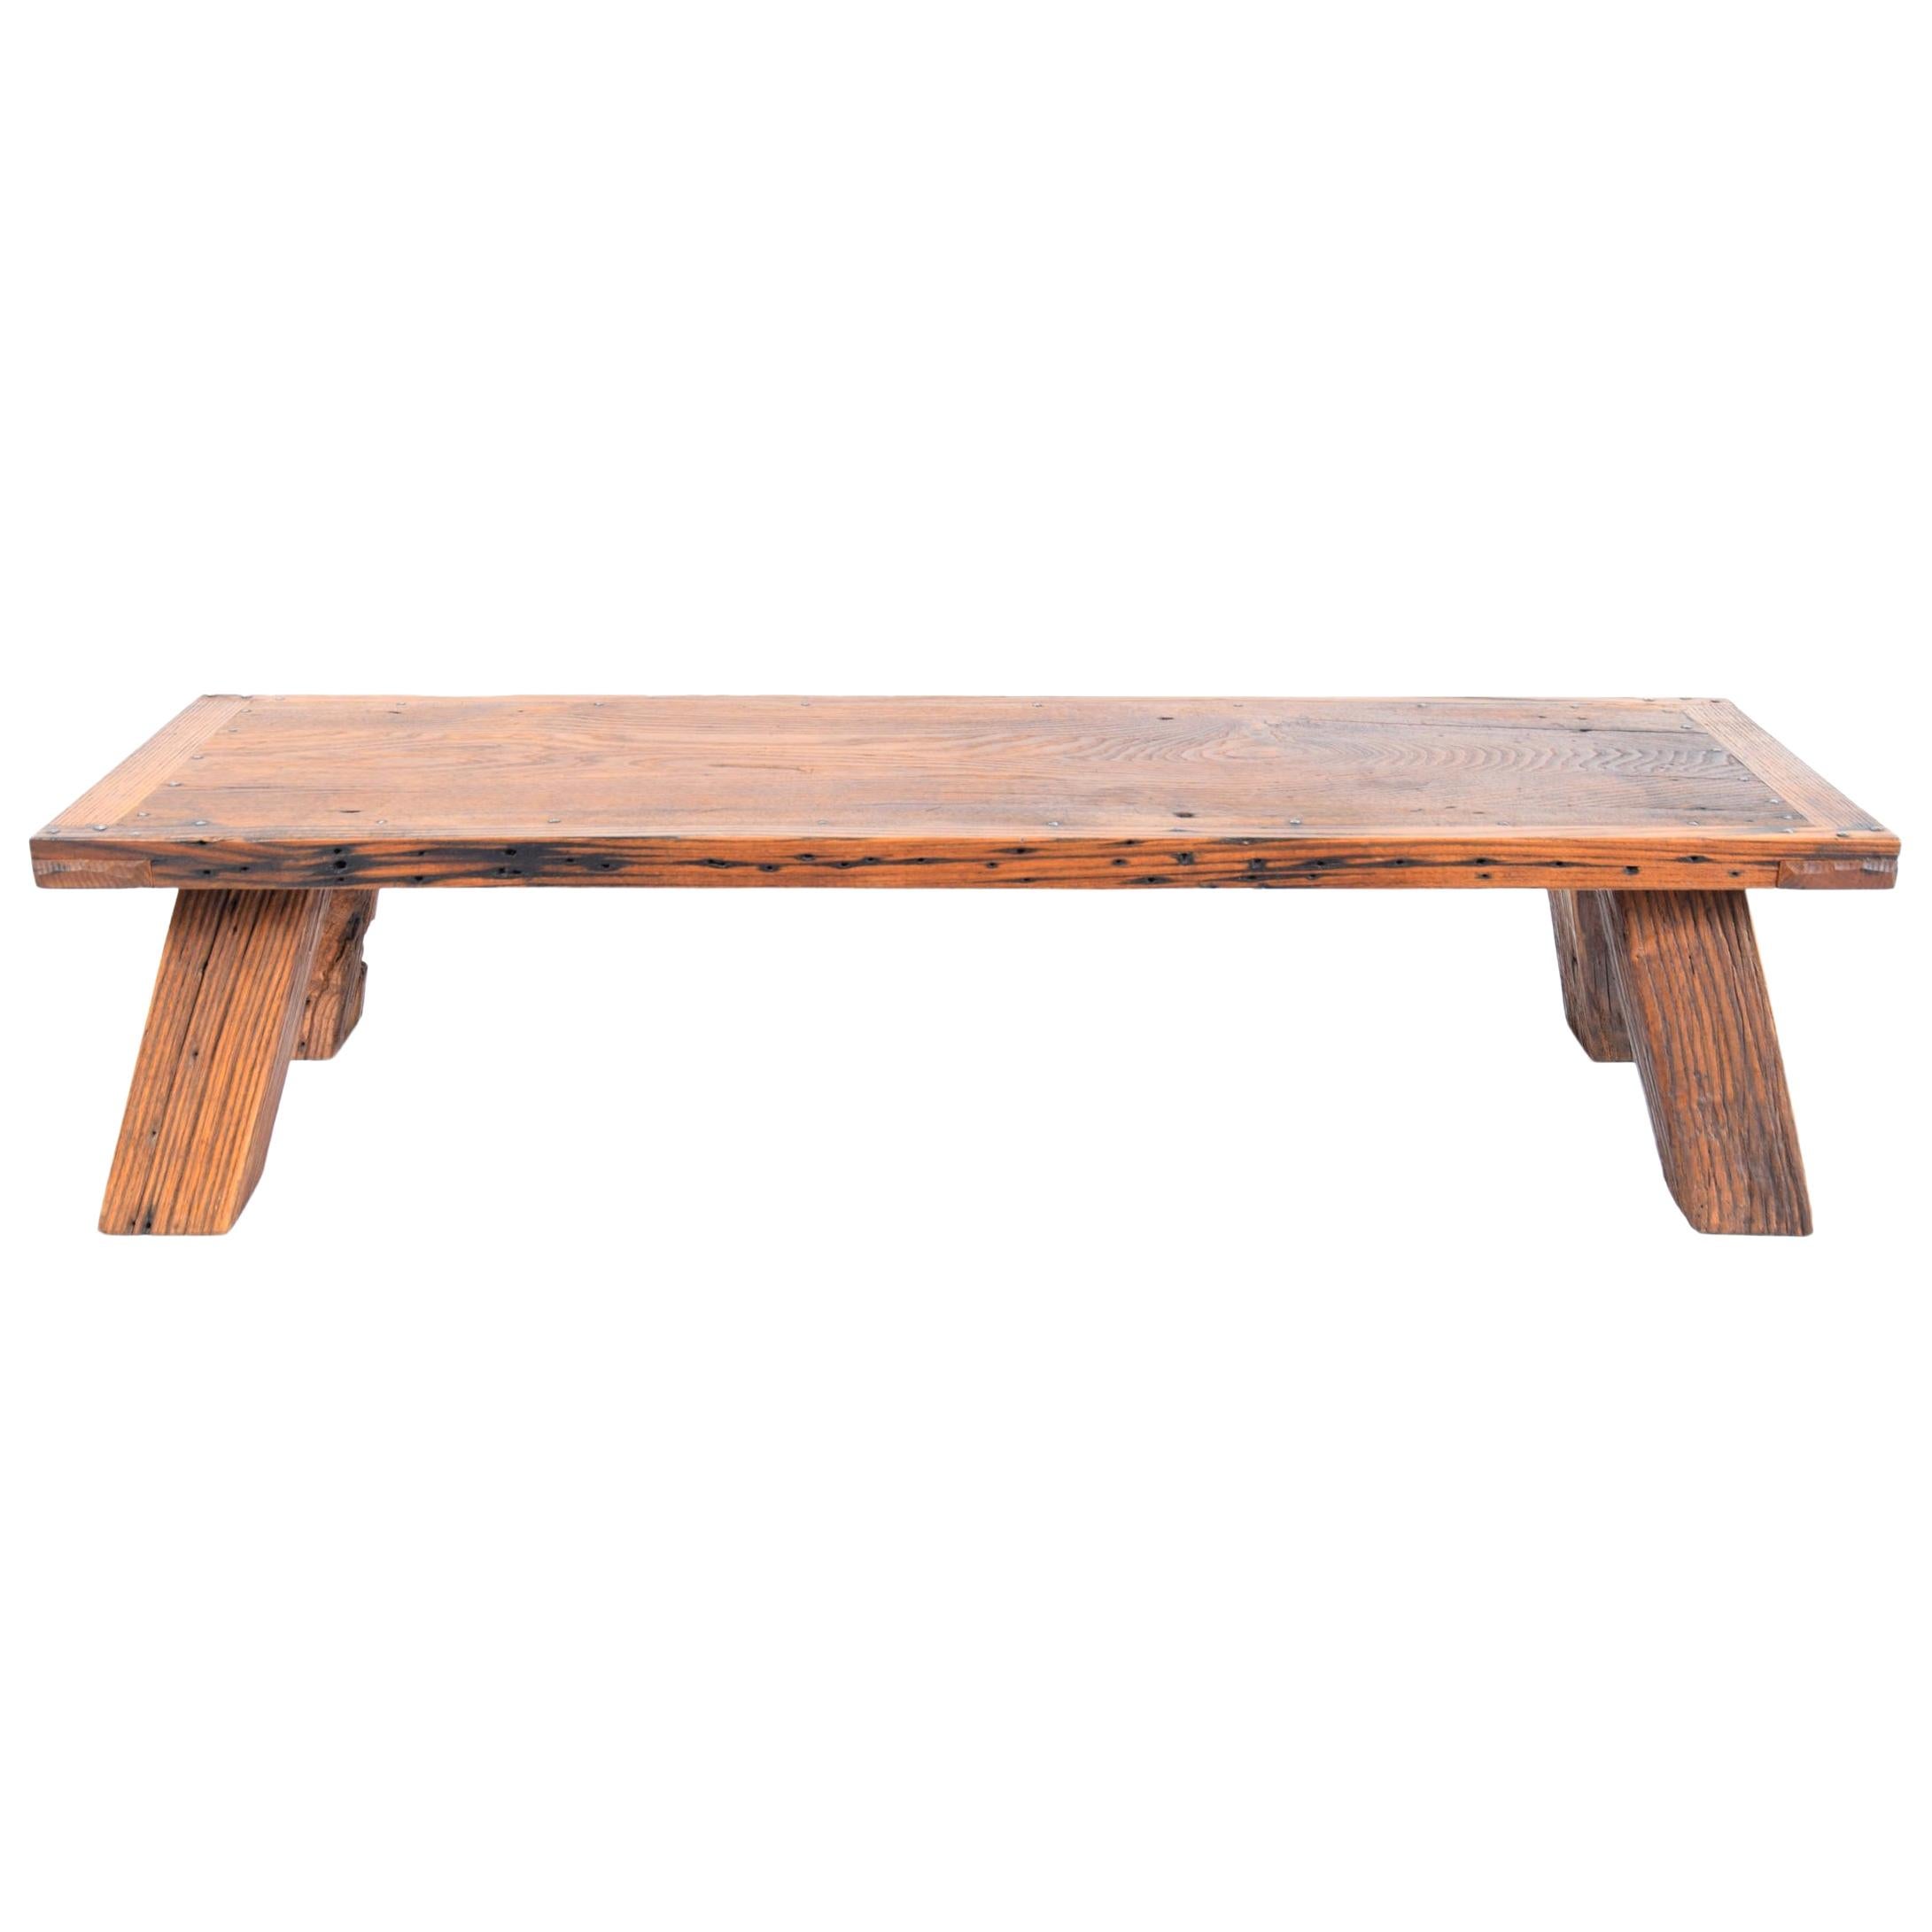 Solid Chestnut Coffee Table or Bench